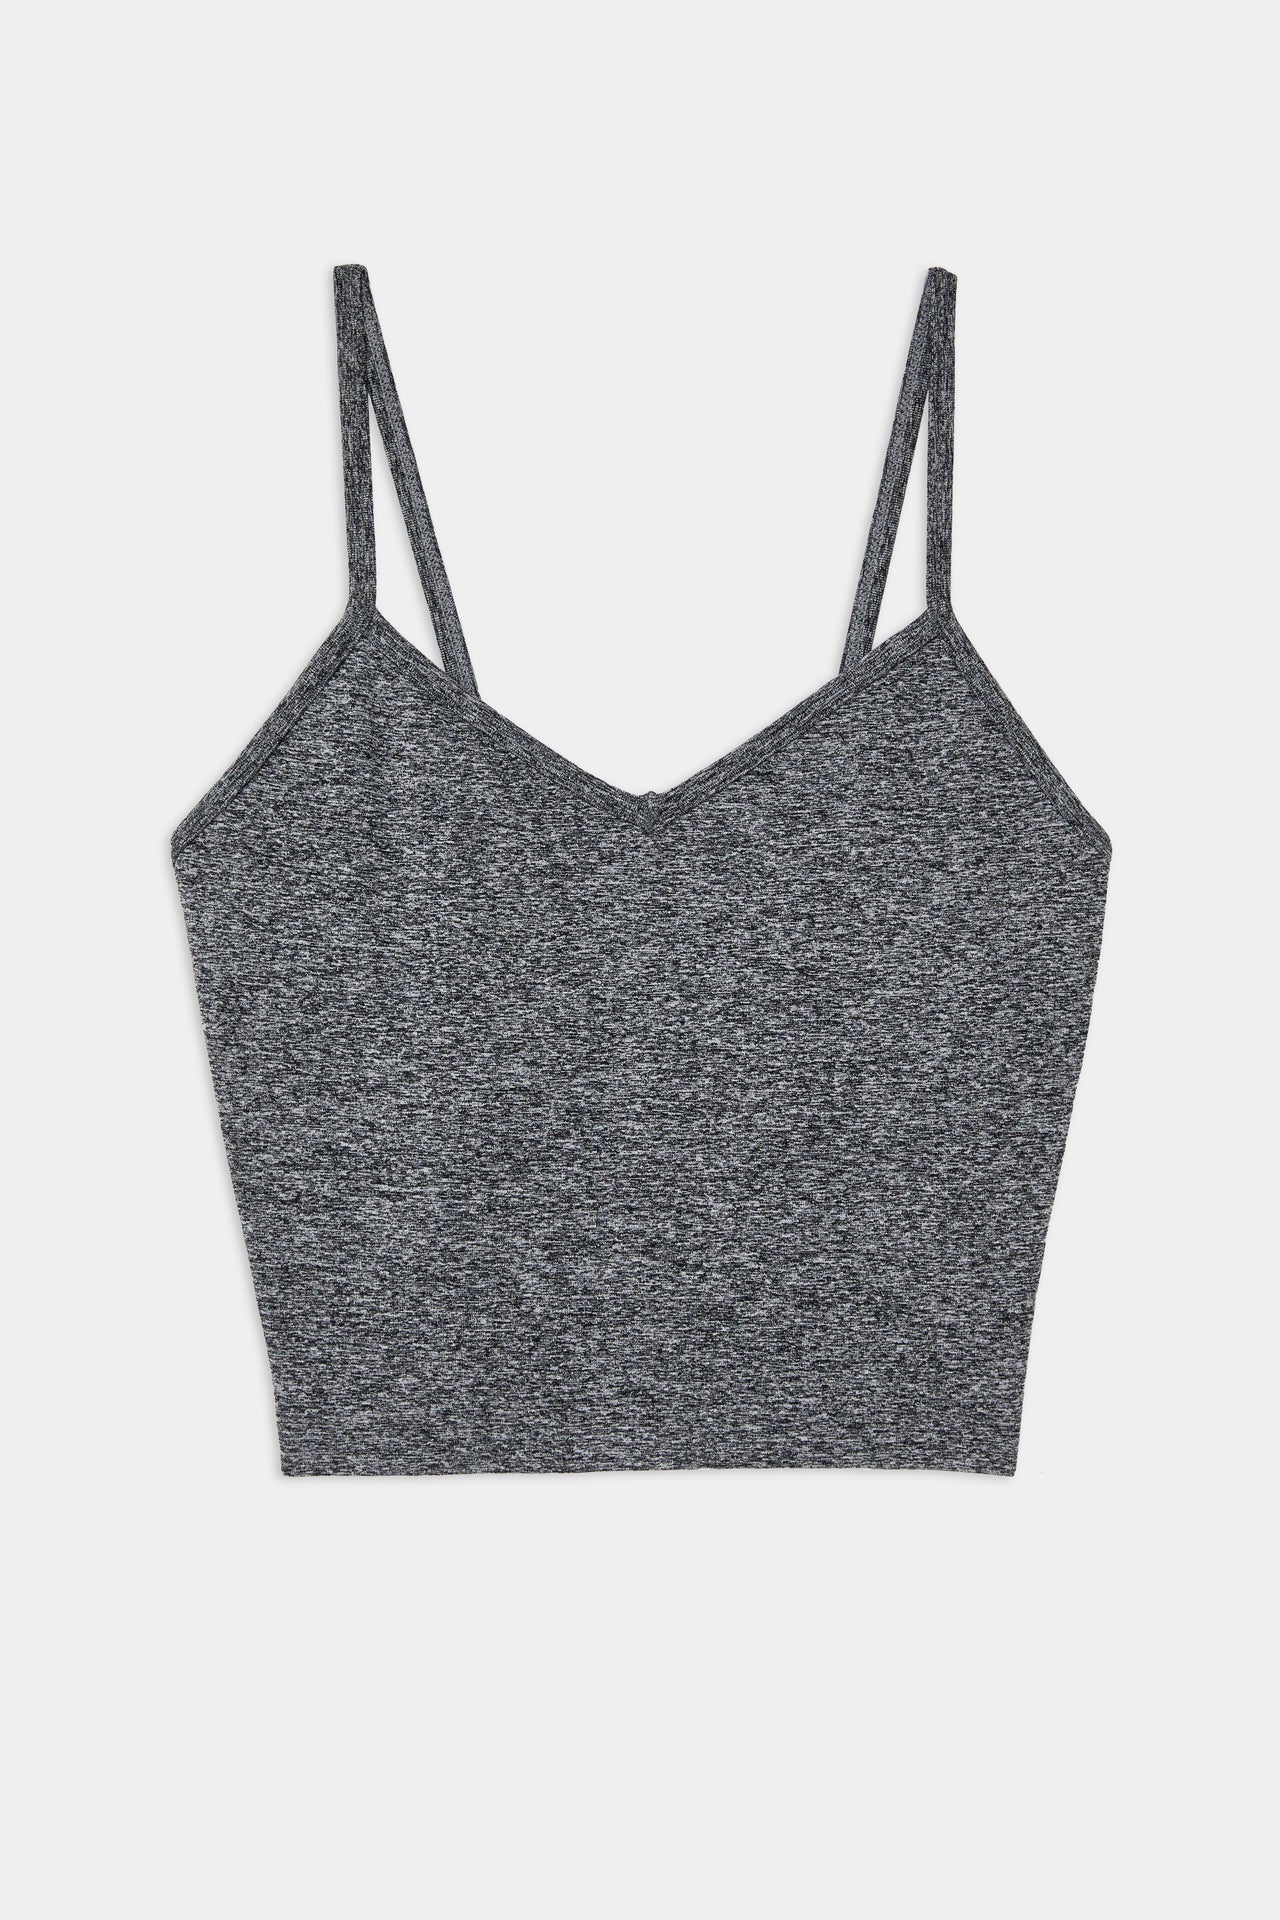 A Loren Seamless Cami - Heather Grey by Splits59 on a white background.